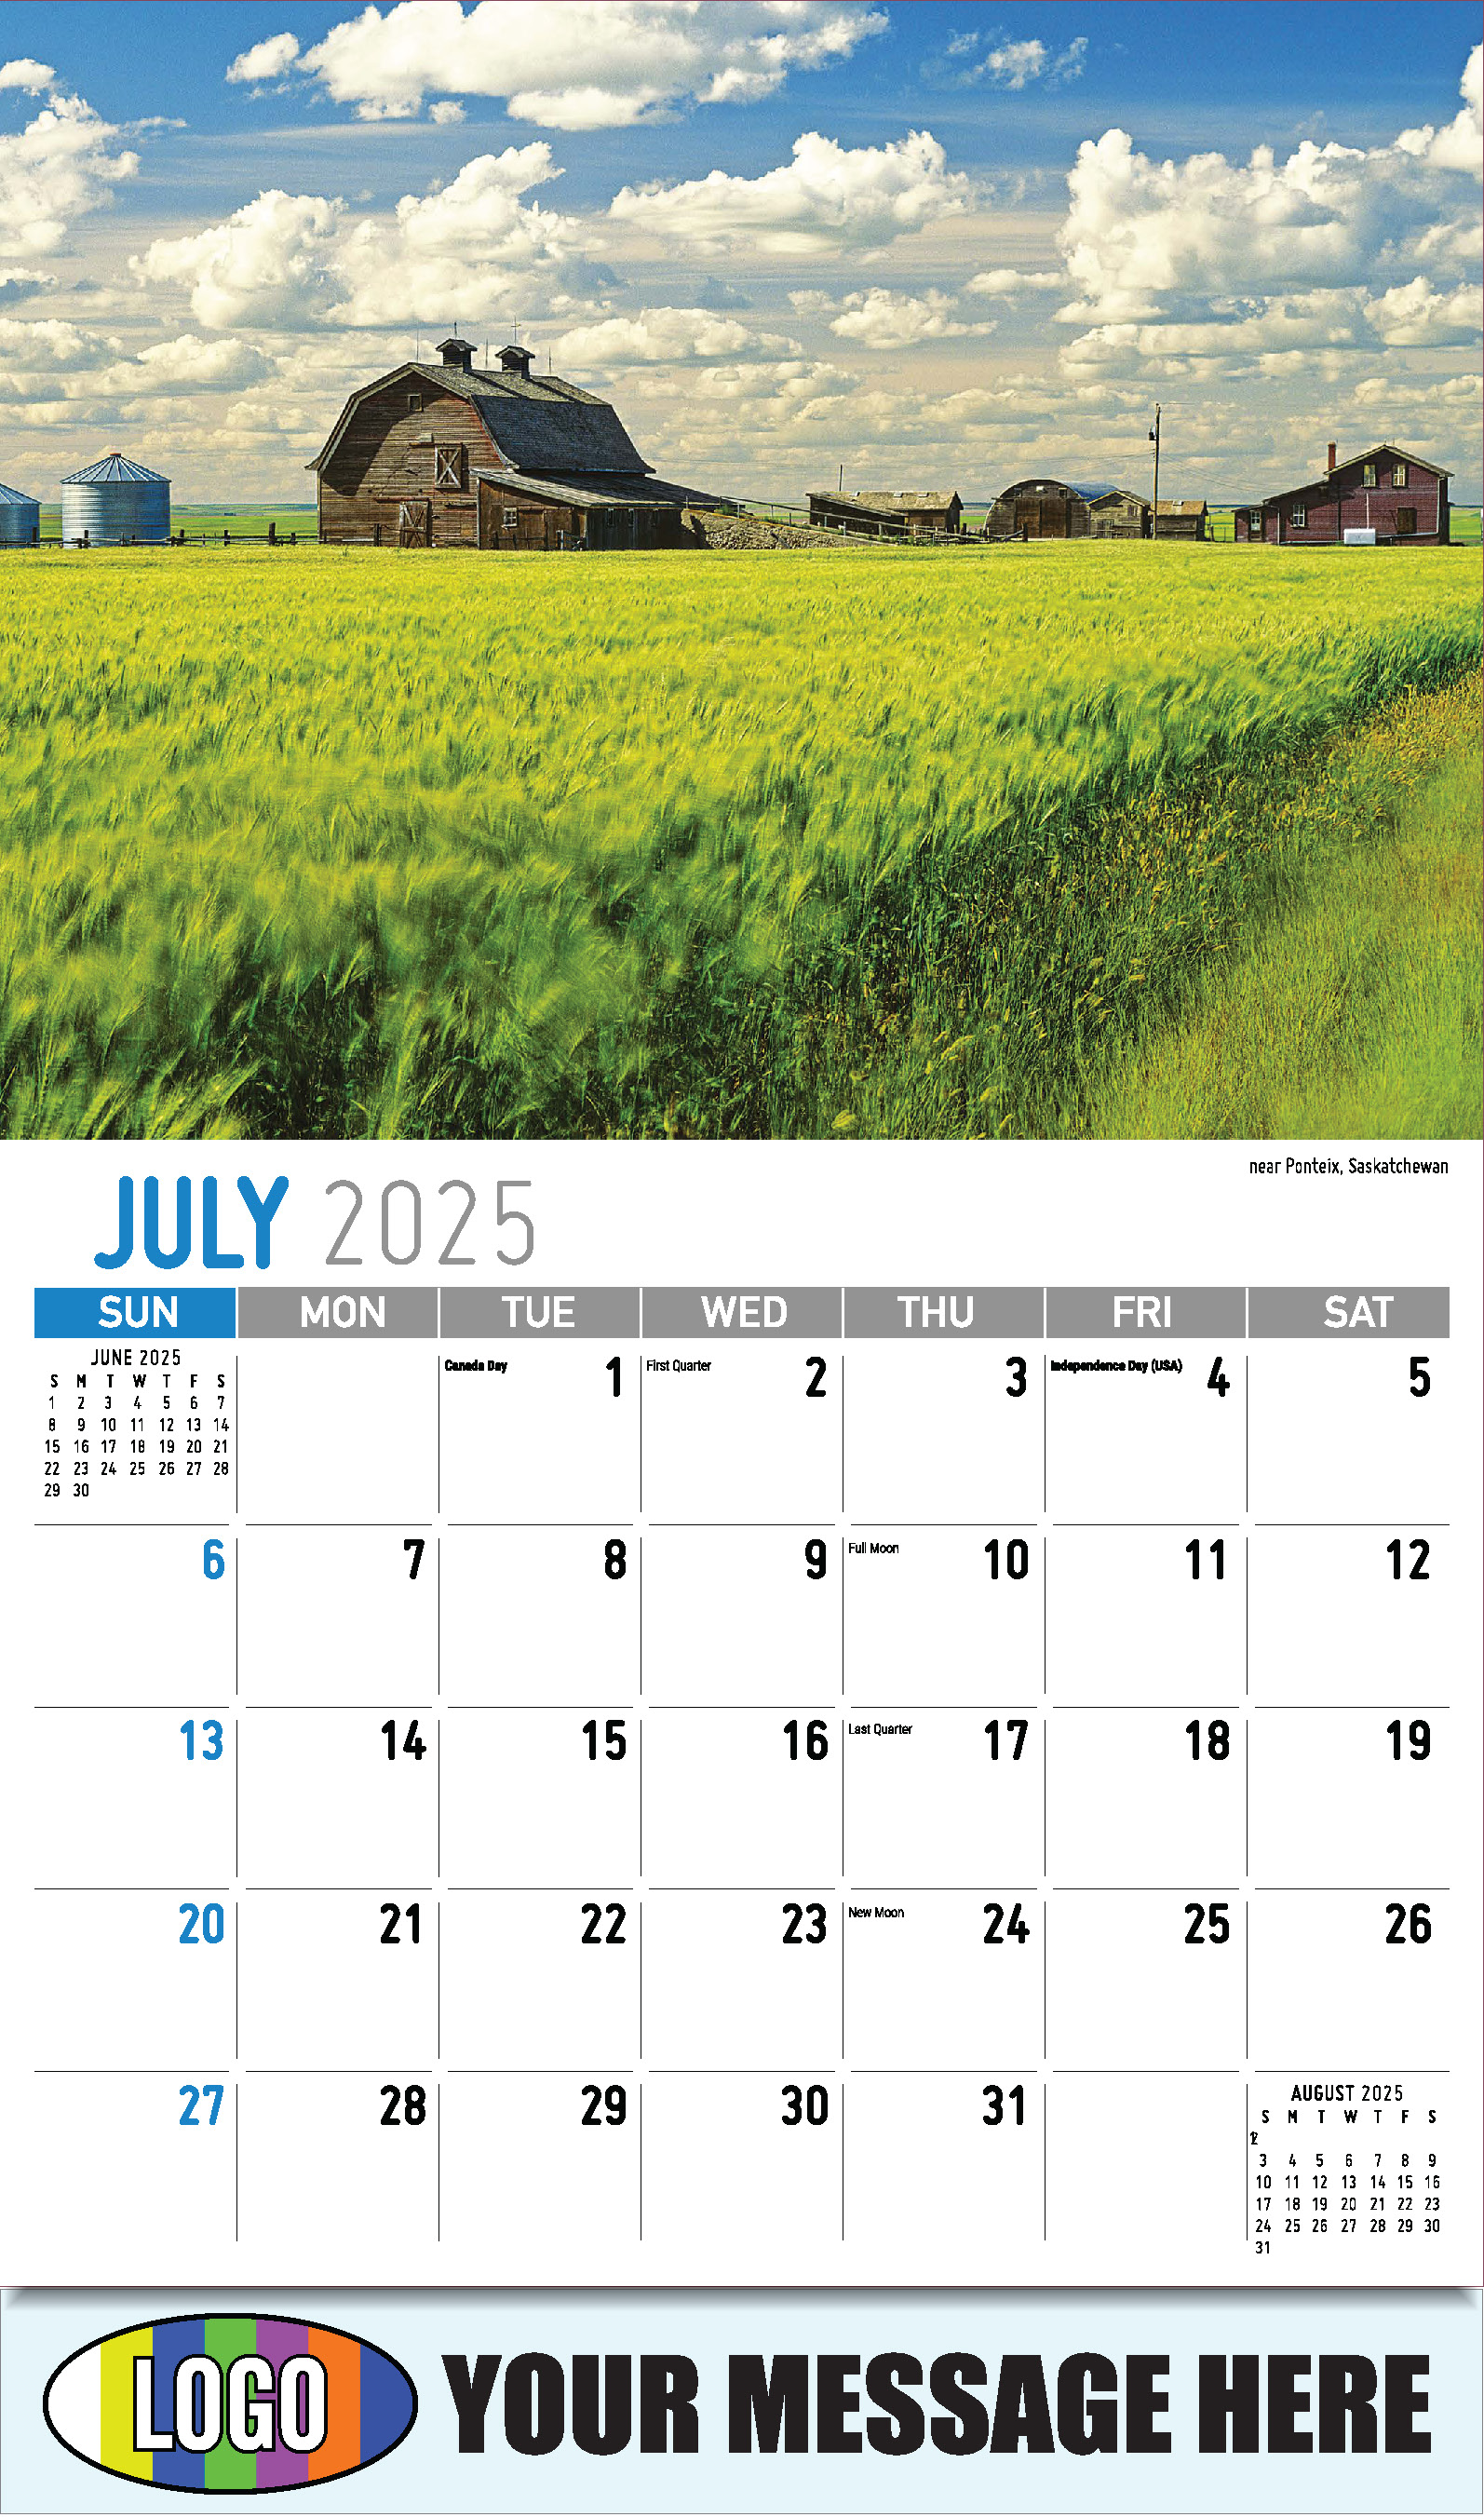 Scenes of Western Canada 2025 Business Promotional Wall Calendar - July